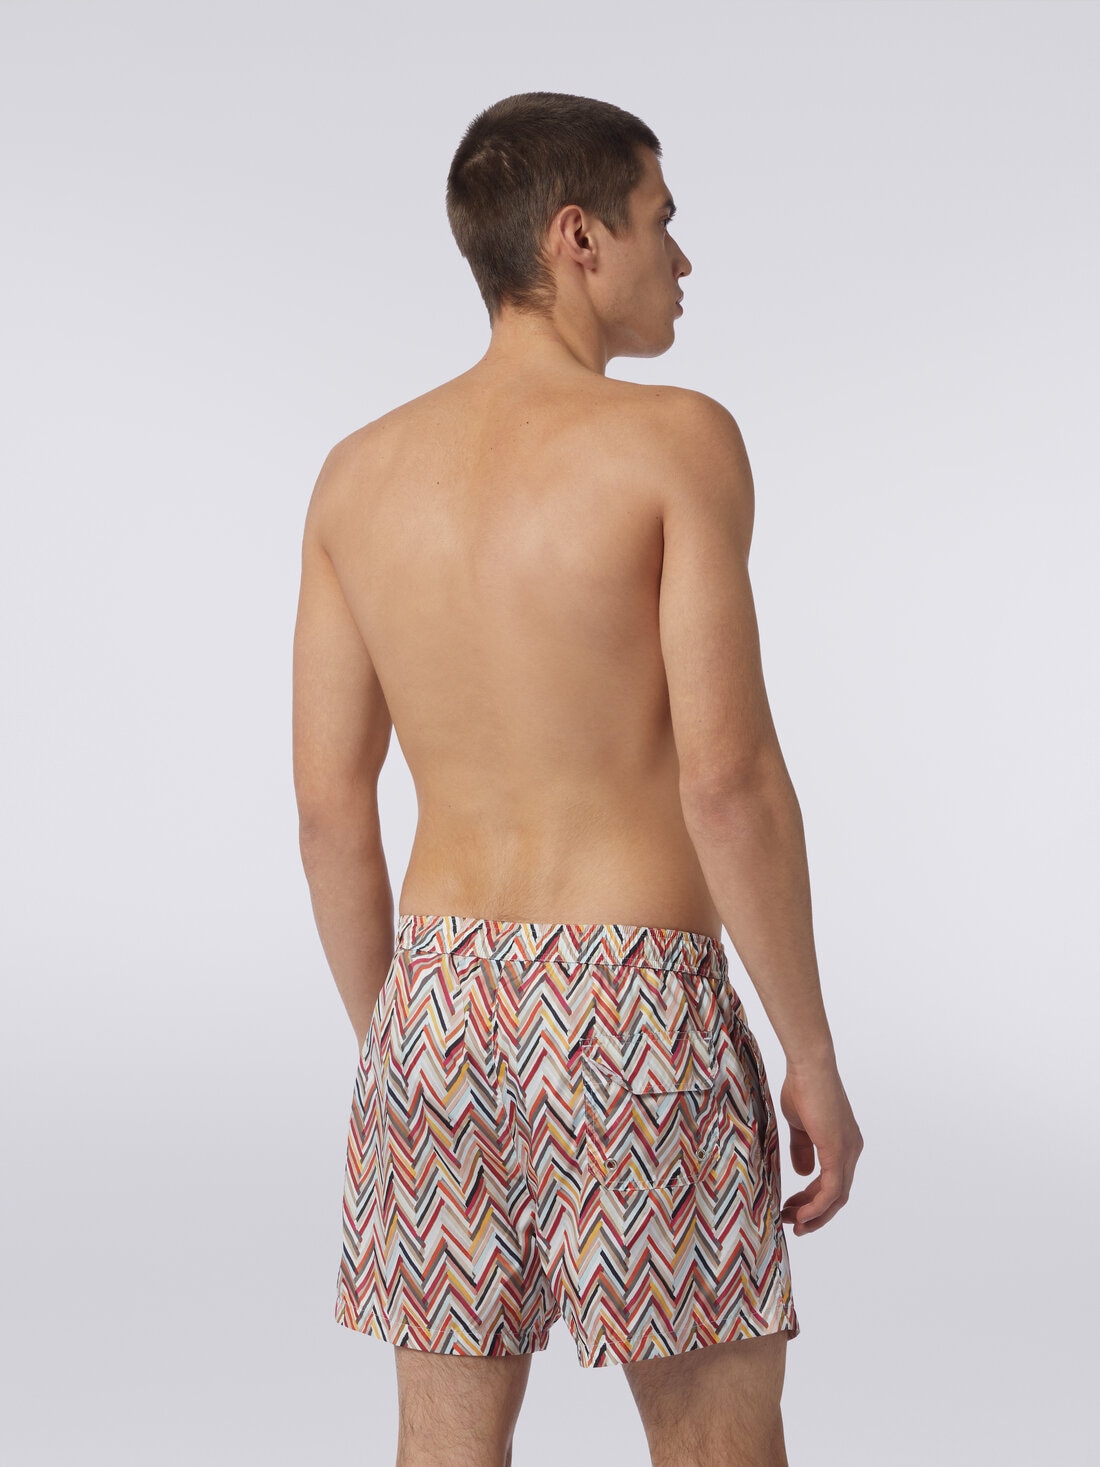 Swimming trunks with brushstroke effect zigzag print, Multicoloured  - US24SP00BW00S1SM993 - 3